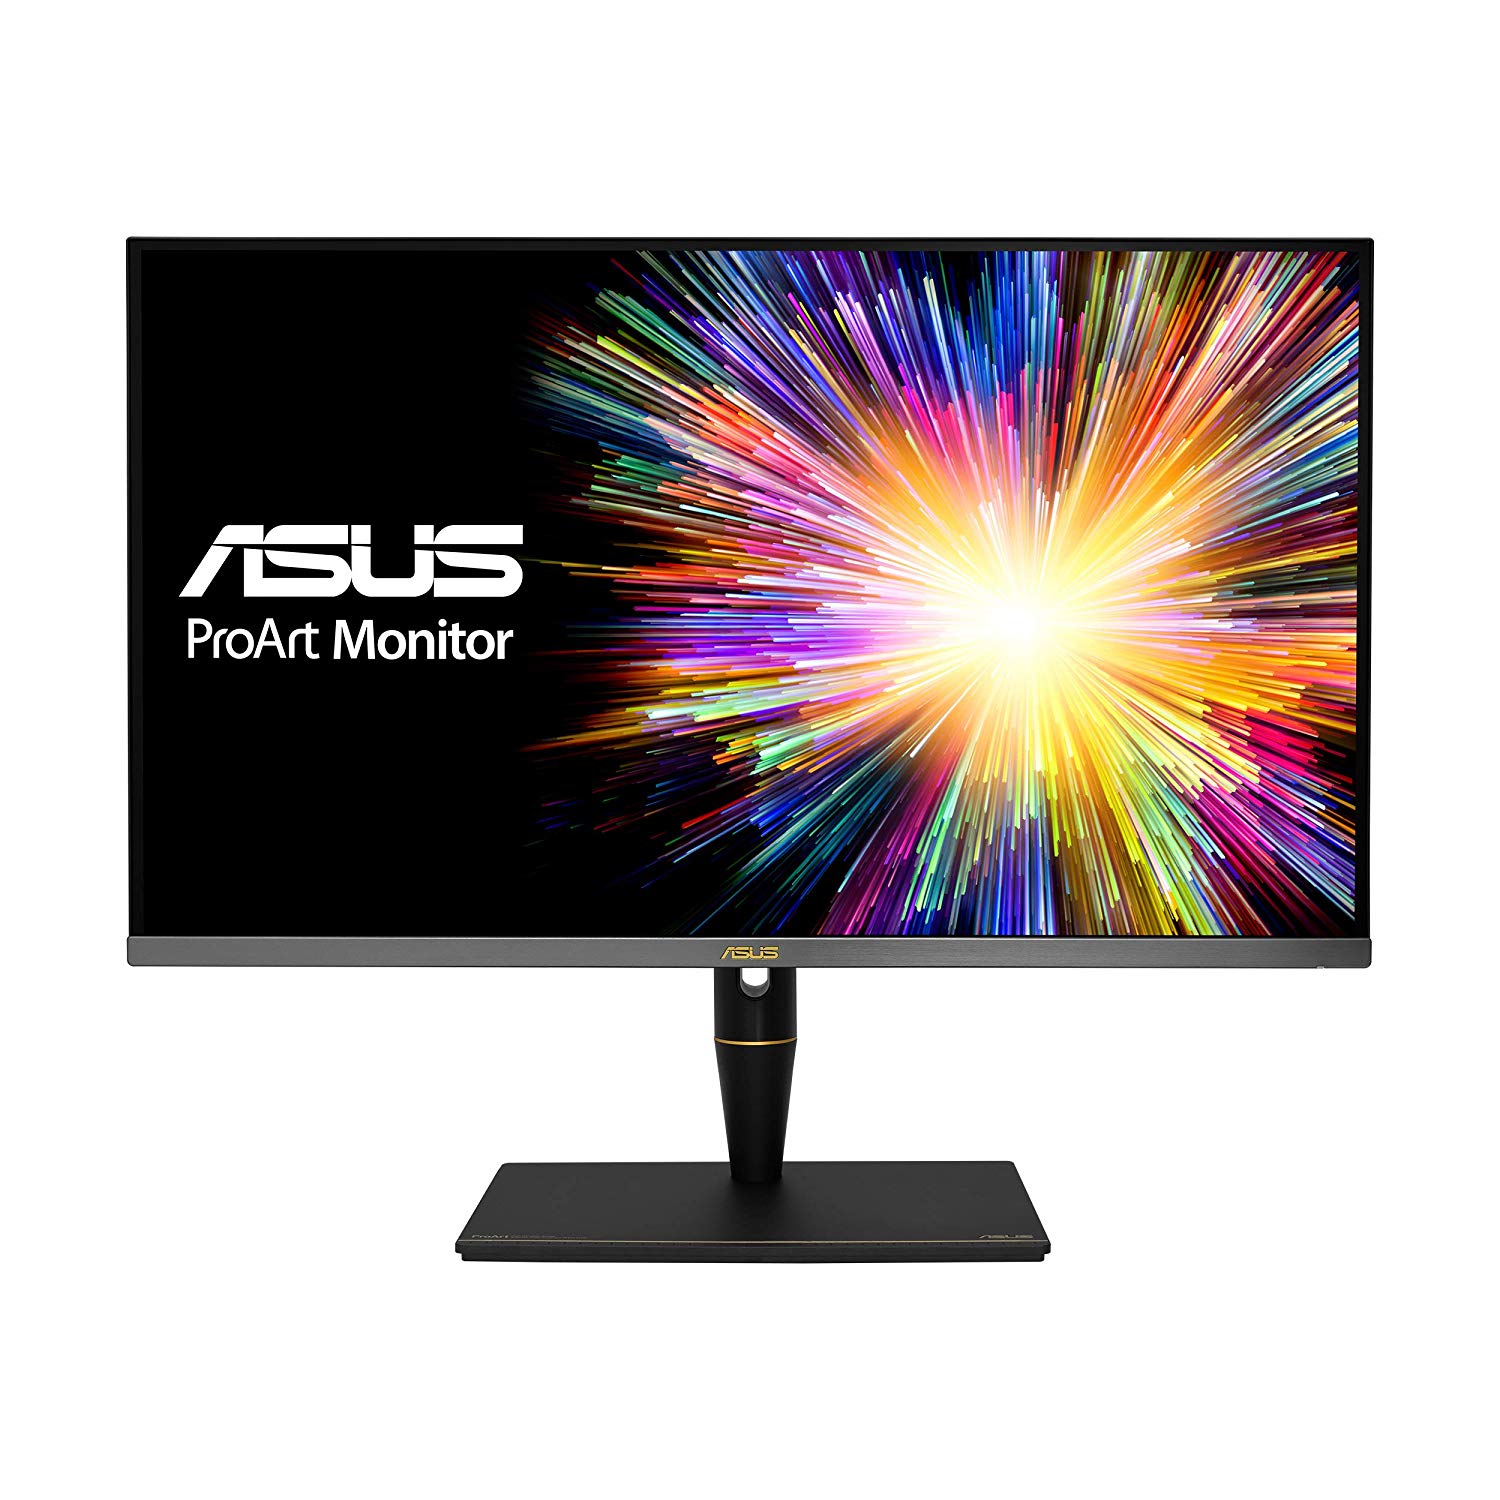 Asus ProArt PA32UCX 32 Inch 4K (3840 X 2160) HDR Mini LED Professional Monitor 99.5 Adobe RGB Delta E<1 IPS 5ms Thunderbolt 3 DisplayPort HDMI USB Dolby Vision HDR10 Hlg Displayhdr1000 Eye Care.